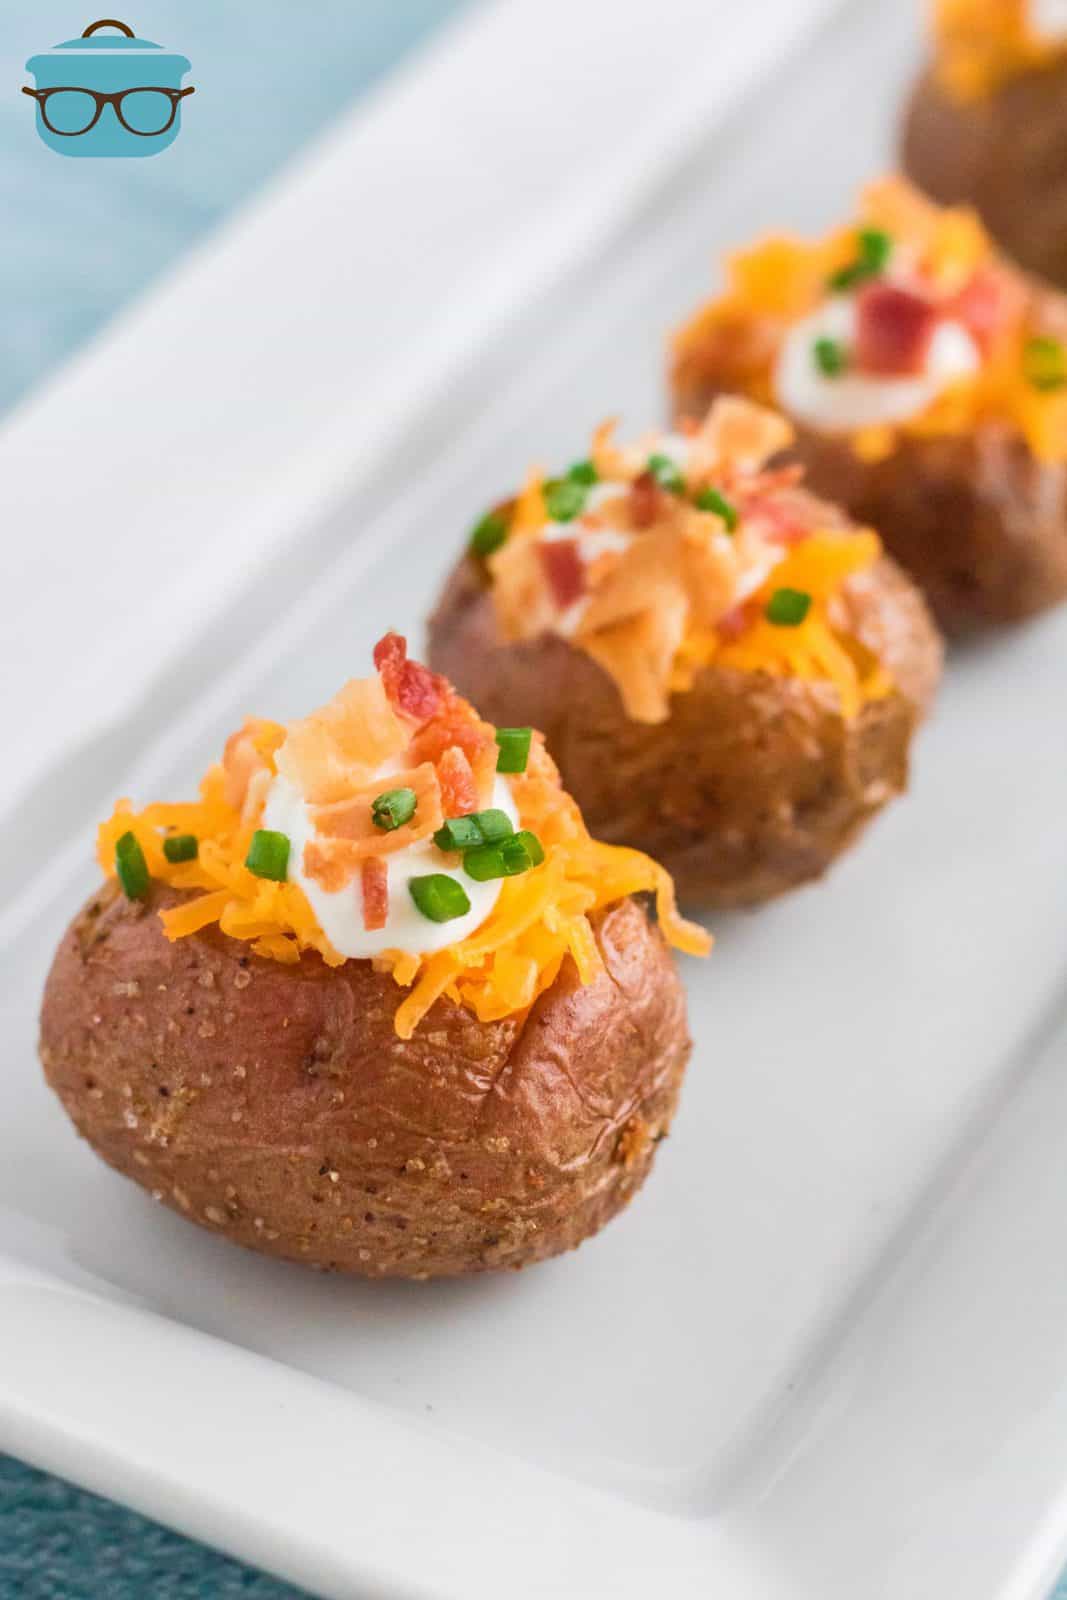 Lined up Air Fryer Baby Baked Potatoes on white platter.